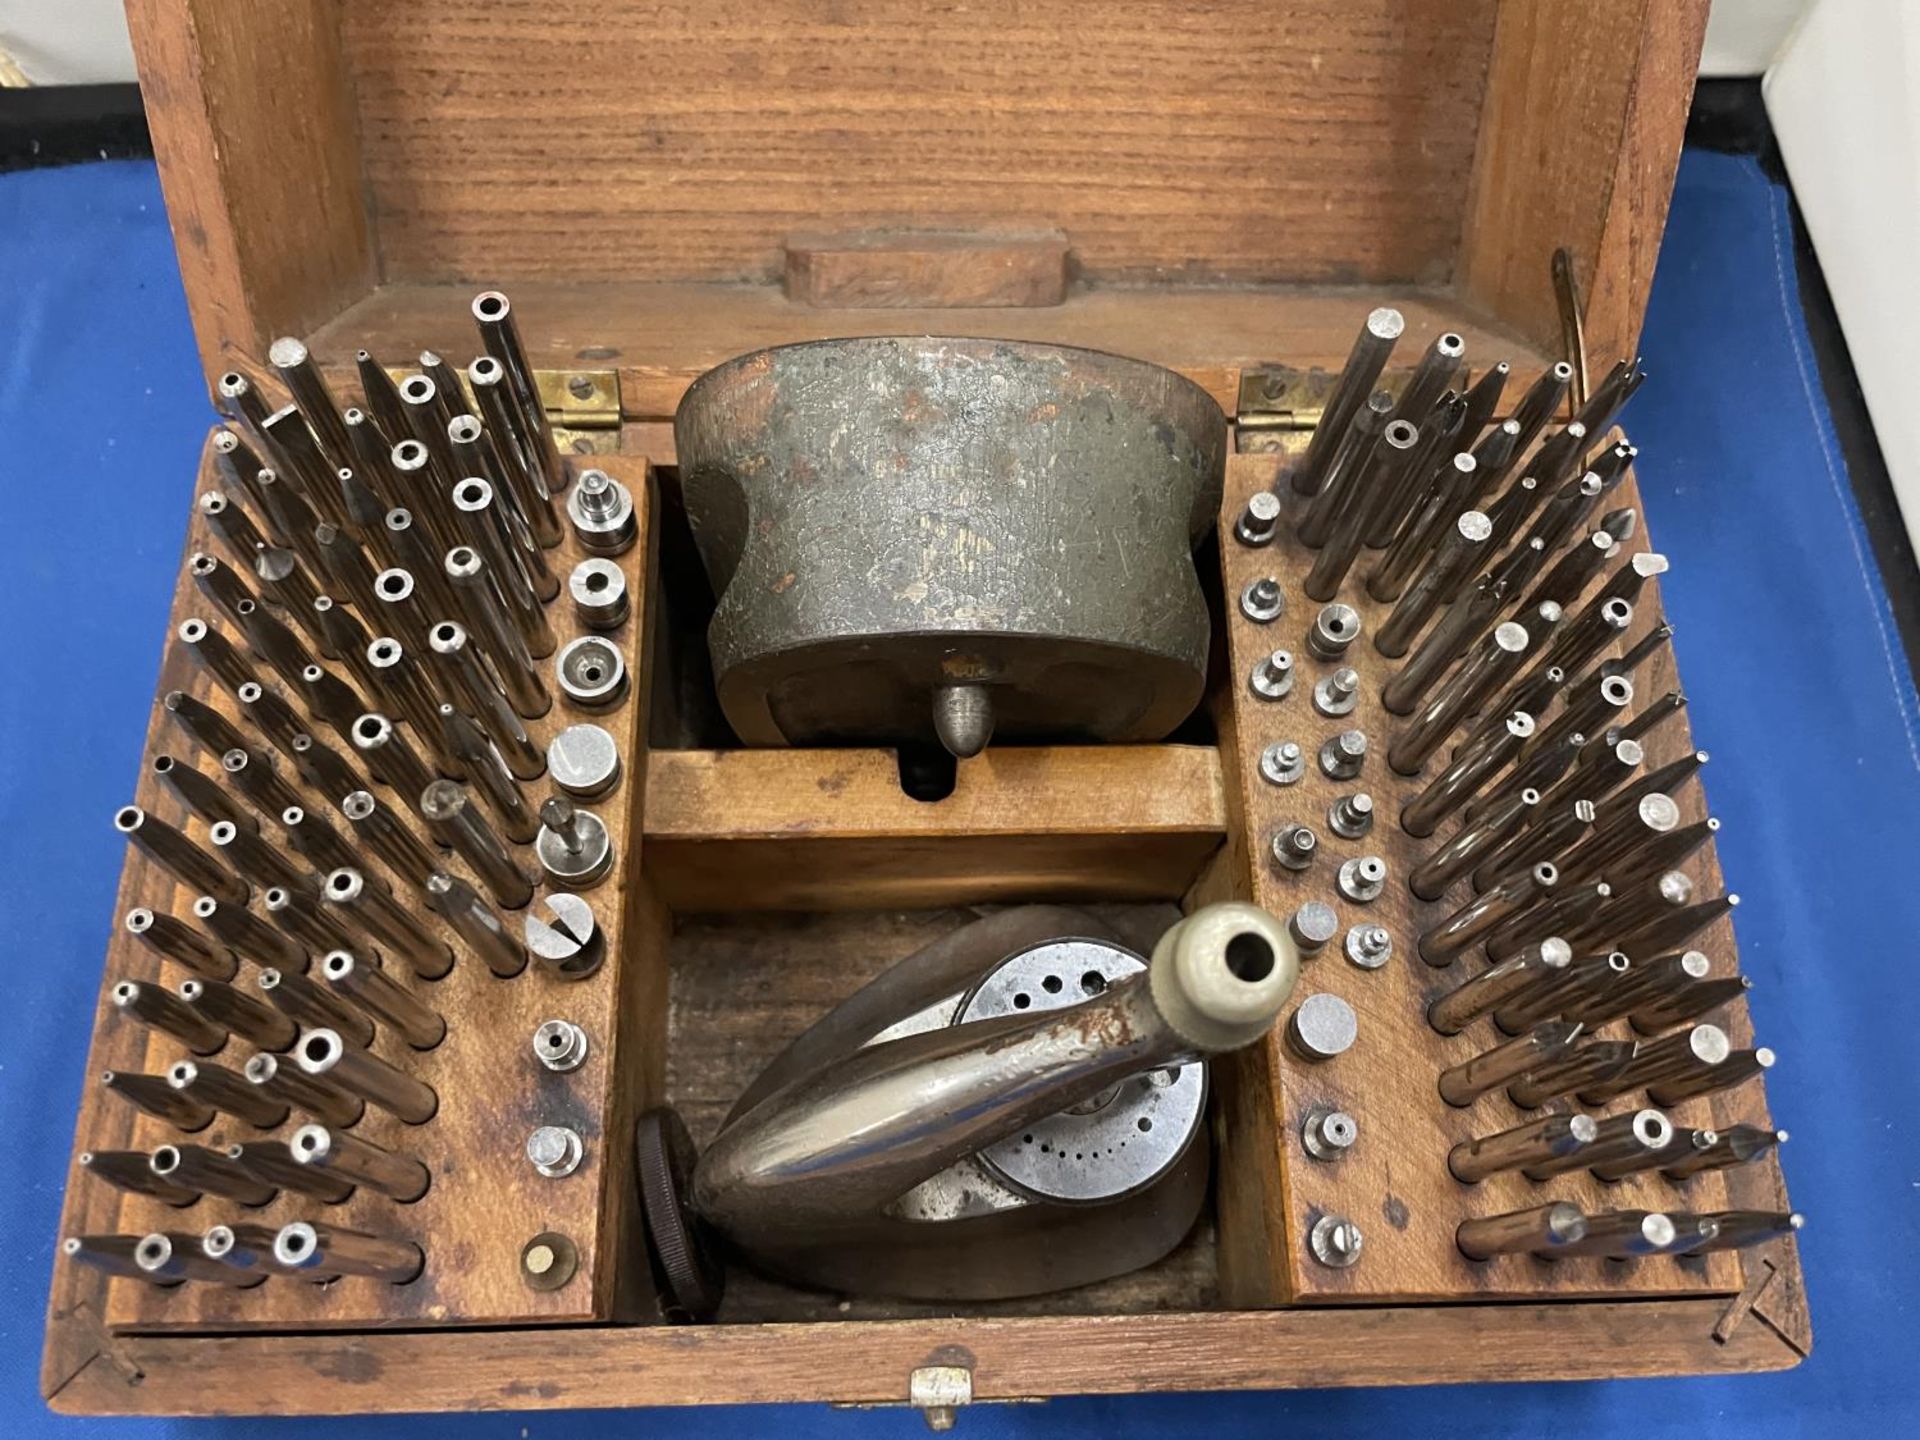 A BOLEY WATCHMAKERS RIVETING AND STAKING TOOLS (COMPLETE SET) IN ORIGINAL WOODEN BOX - Image 8 of 14